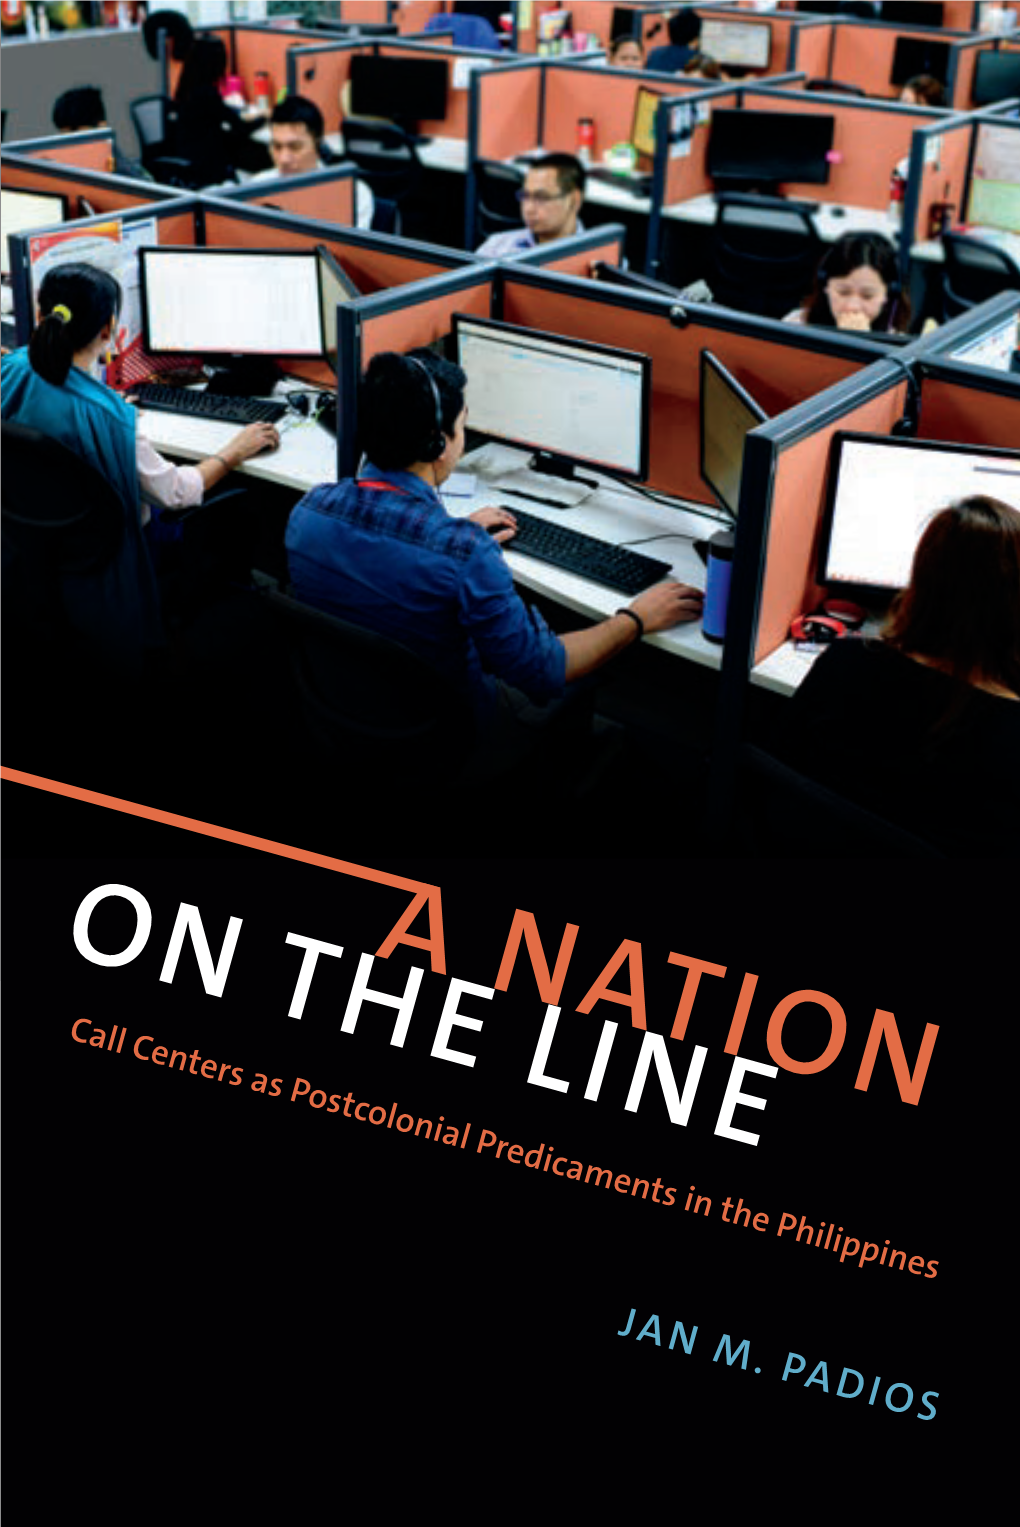 JAN M. PADIOS Call Centers As Postcolonial Predicaments in The